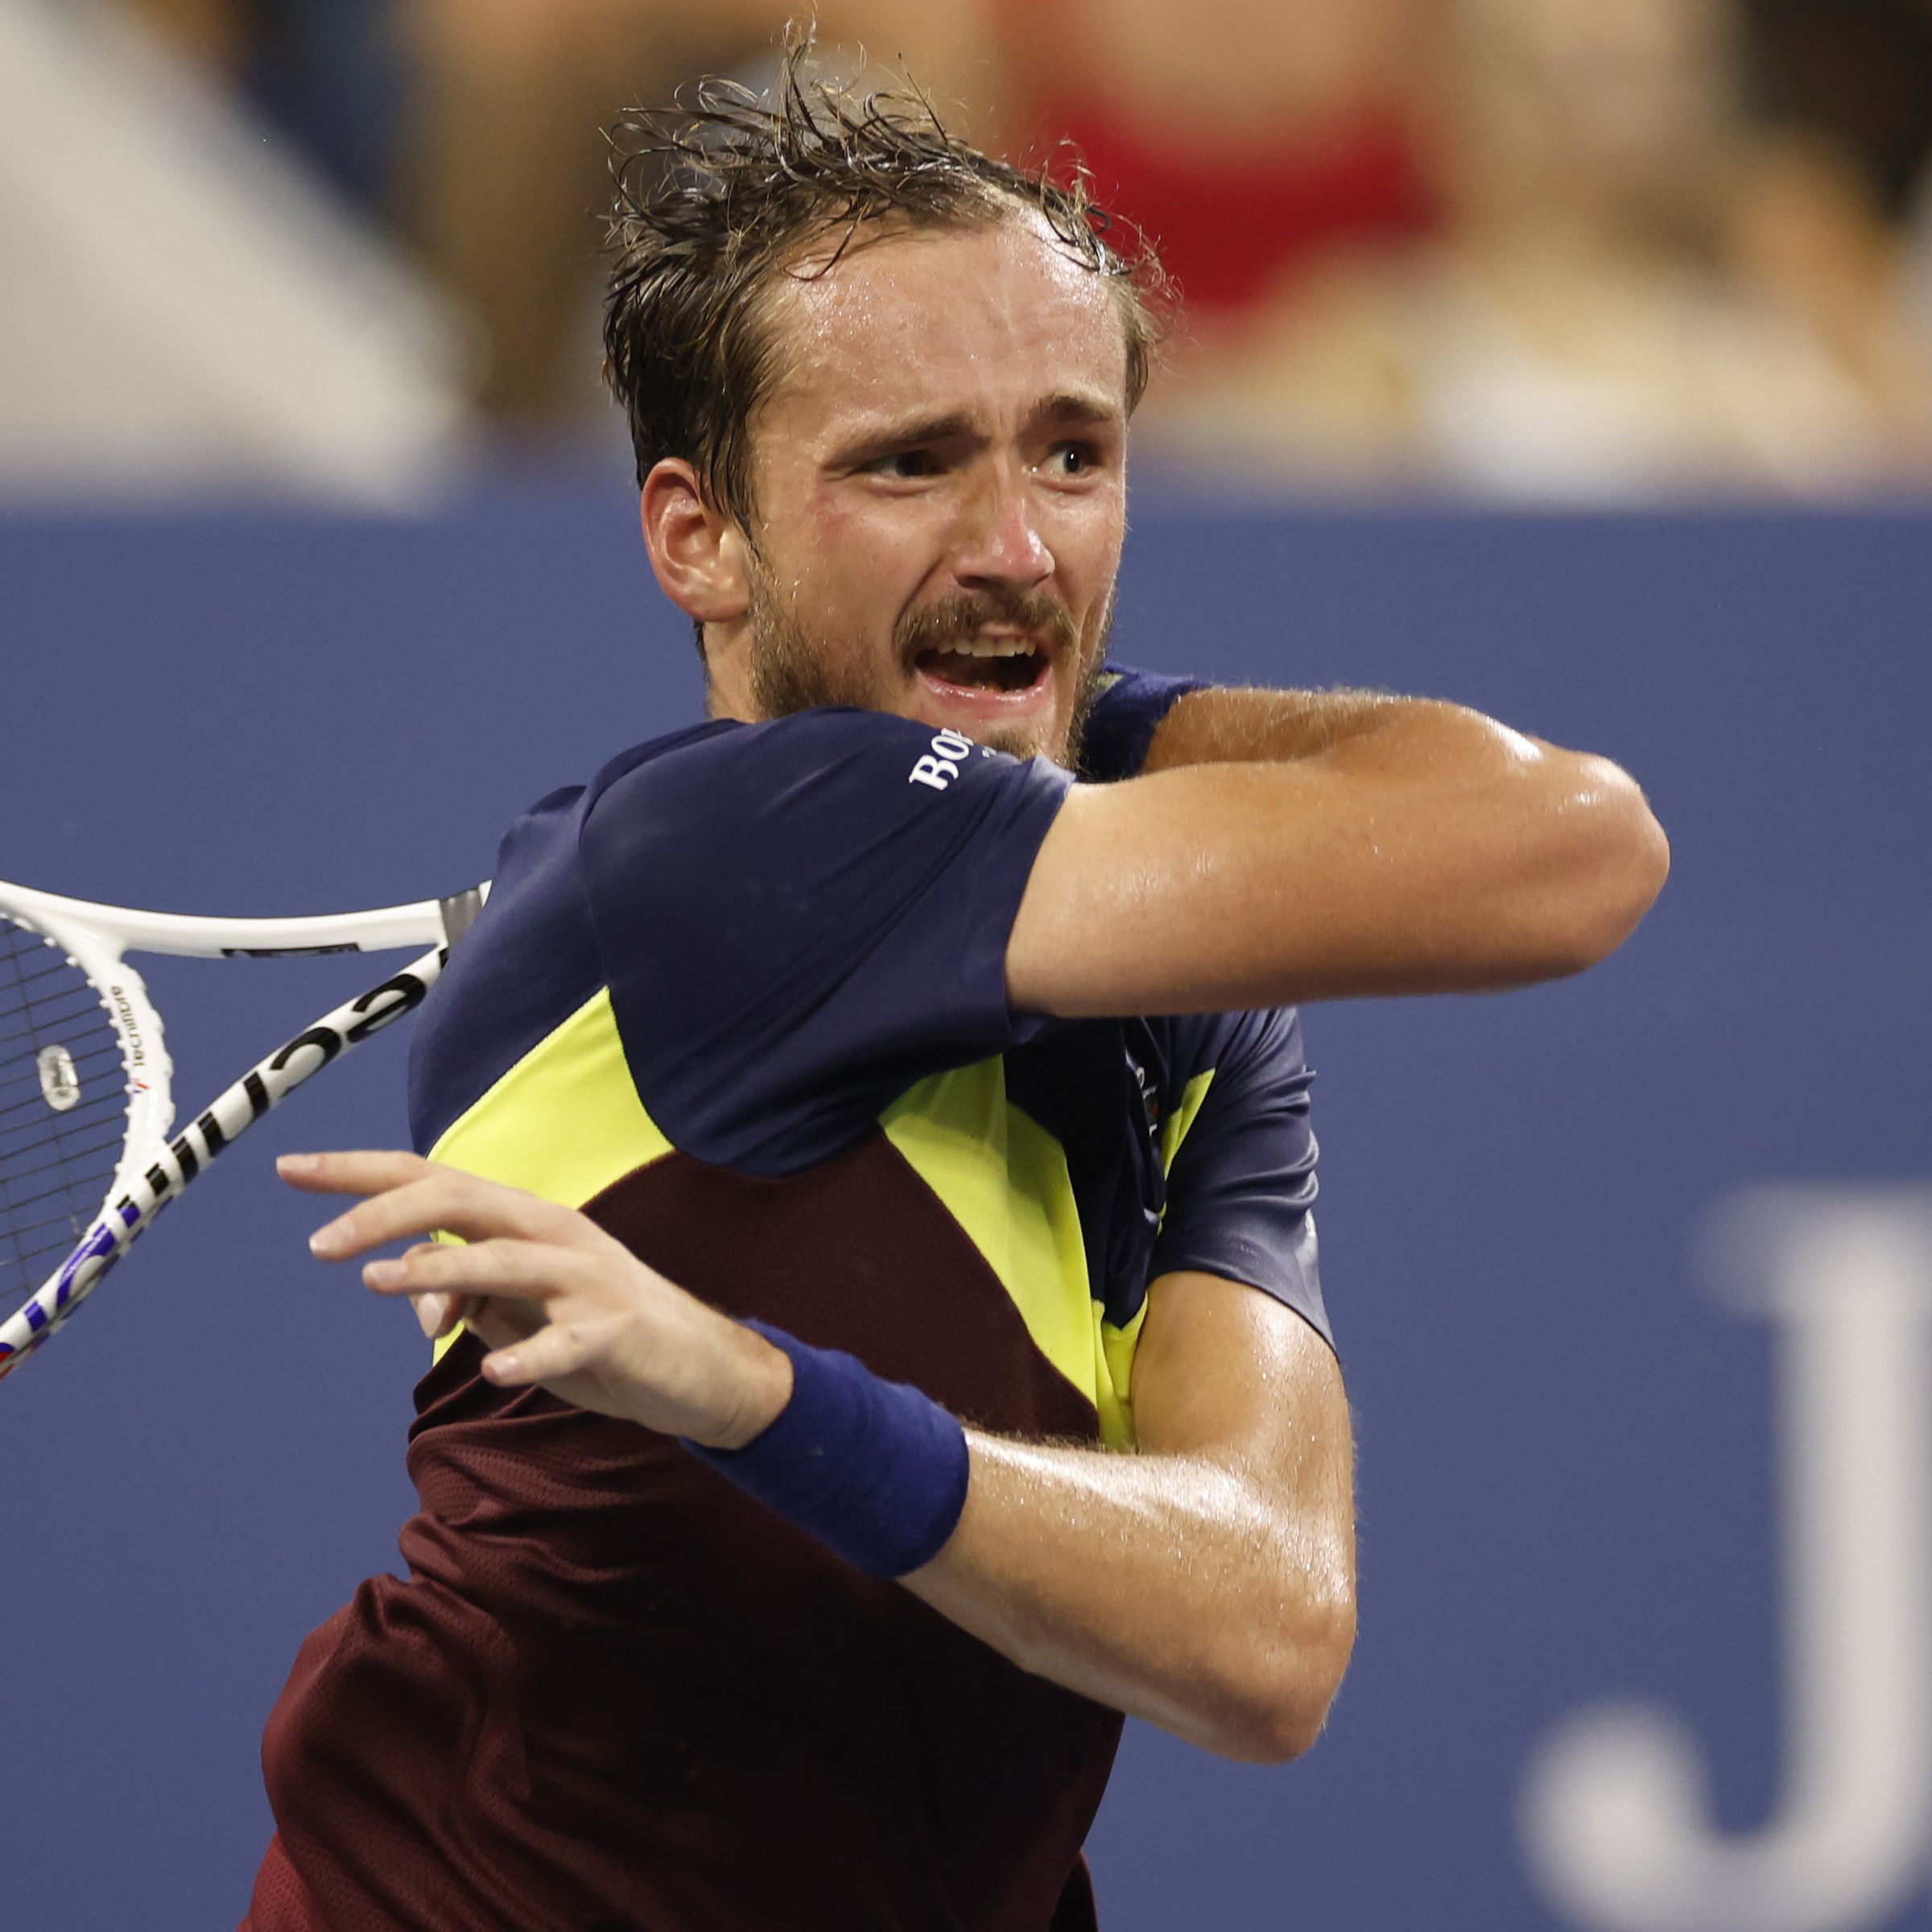 Daniil Medvedev of Russia returns a shot against Alex de Minaur of Australia during their Men’s Singles Fourth Round match on Day Eight of the 2023 US Open at the USTA Billie Jean King National Tennis Center on September 04, 2023 in the Flushing neighborhood of the Queens borough of New York City.